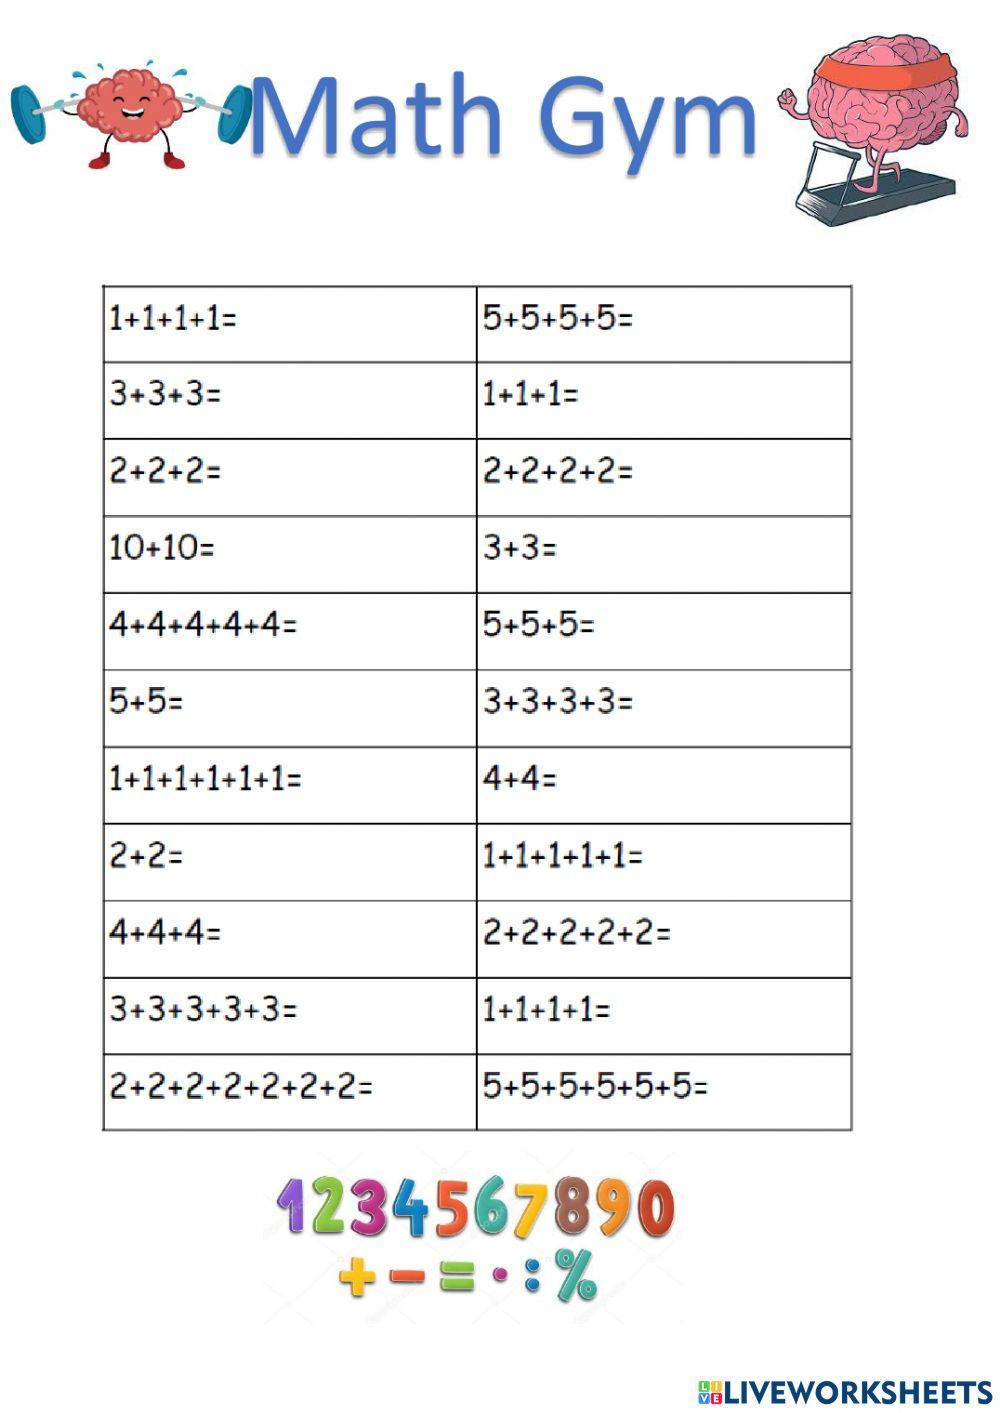 Repeated addition